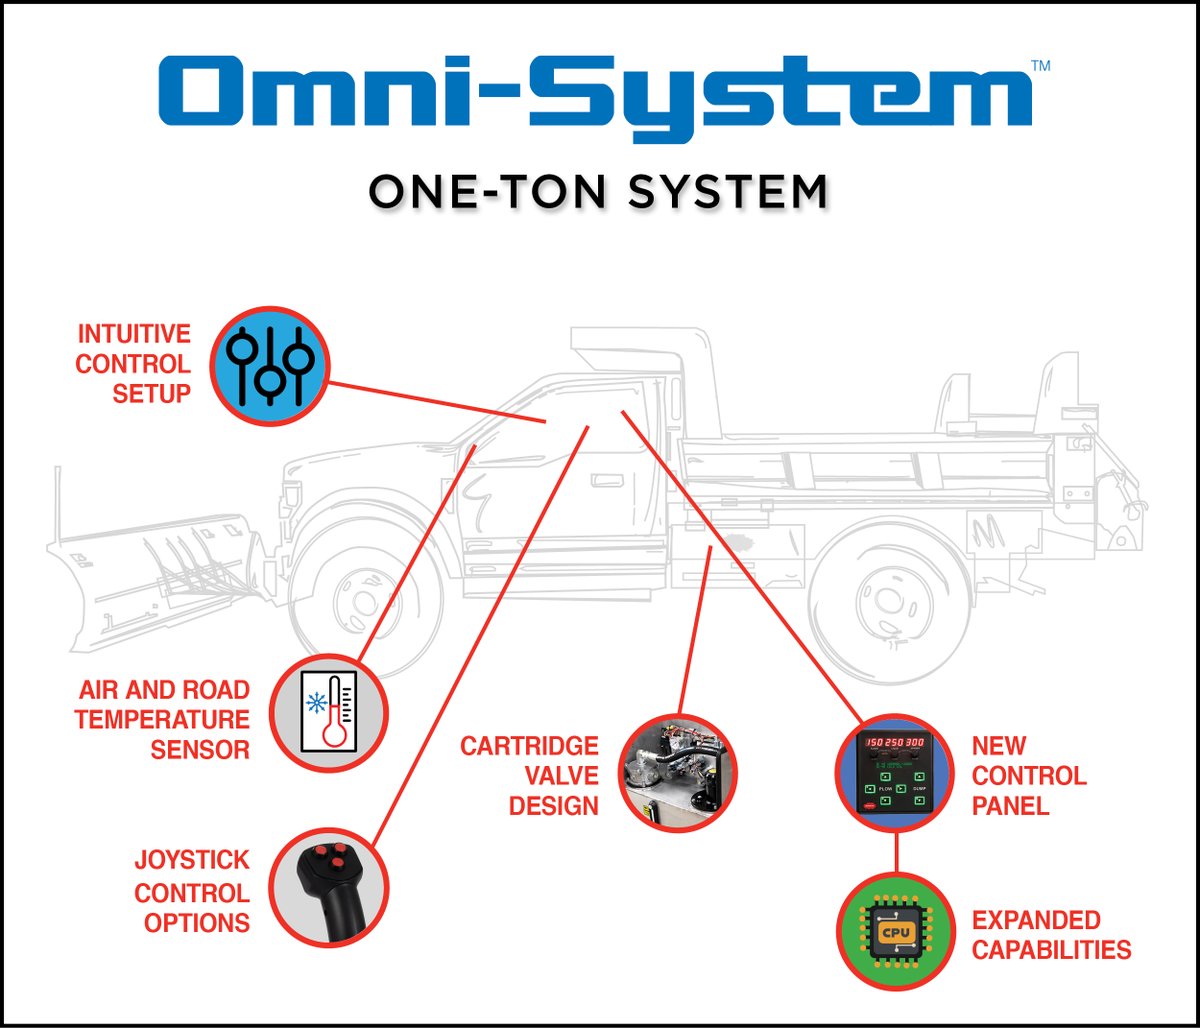 Omni-System One-ton System = Big truck features in a smaller package

Benefits like temperature sensors, joystick options, and more make this system easy to use and install.

#WorkTruckIndustry #SnowAndIce #SnowPlow #FleetManagement #SnowRemoval #SnowControl #IceRemoval